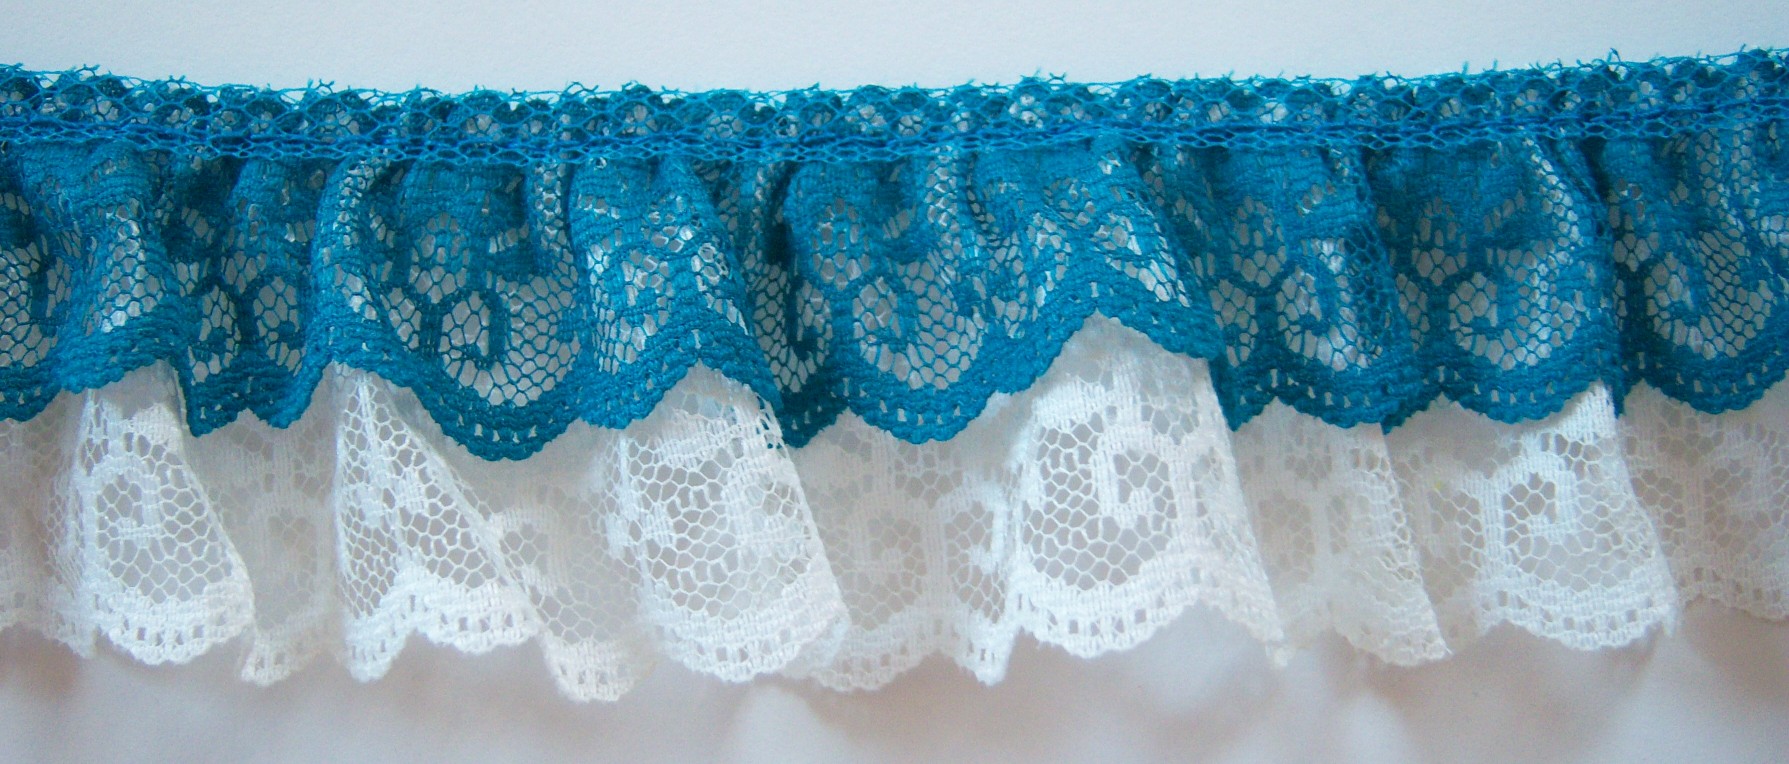 Teal/White Double Gathered Lace